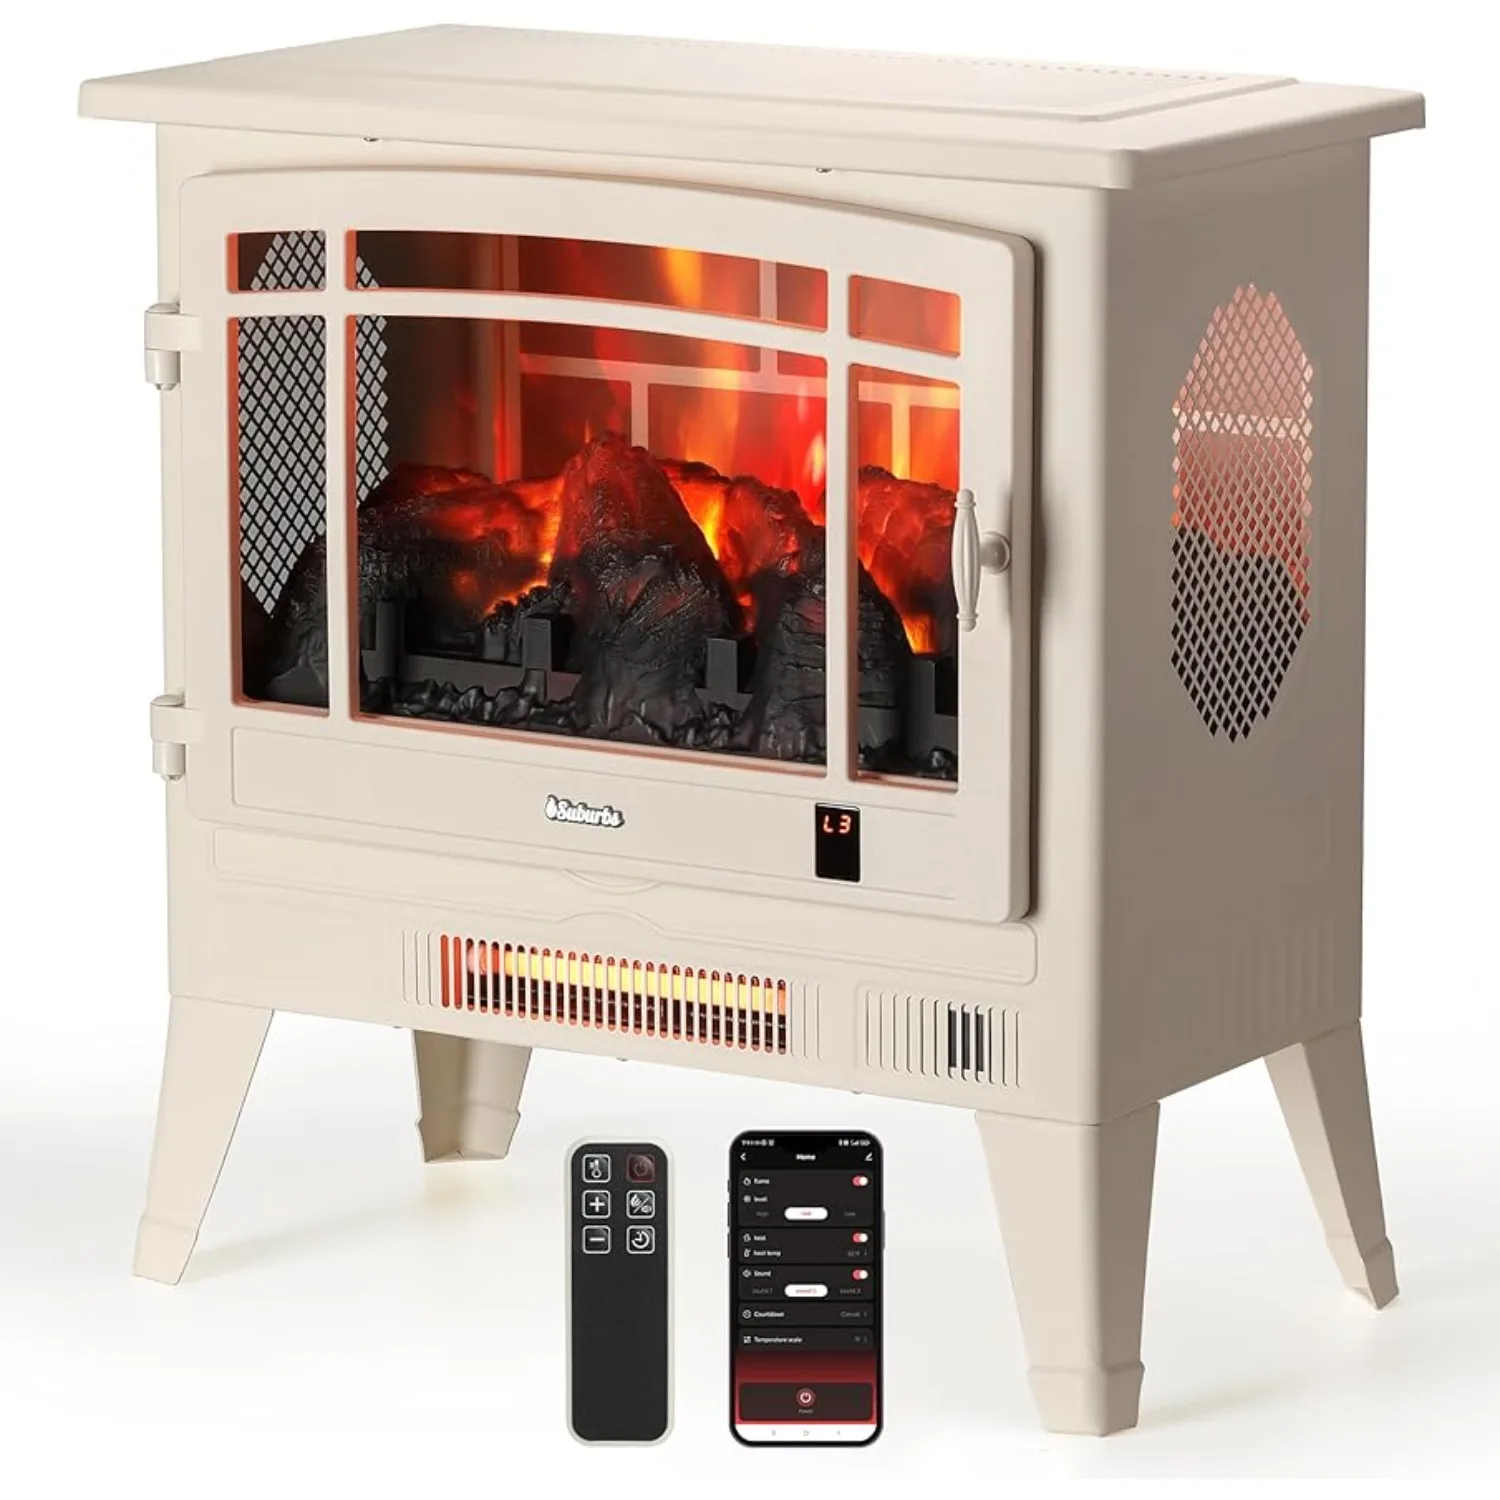 

25" Electric Fireplace Infrared Heater w/ Crackling Sound, Adjustable Flame Effects, Timer, Remote Control 1400W, Ivory